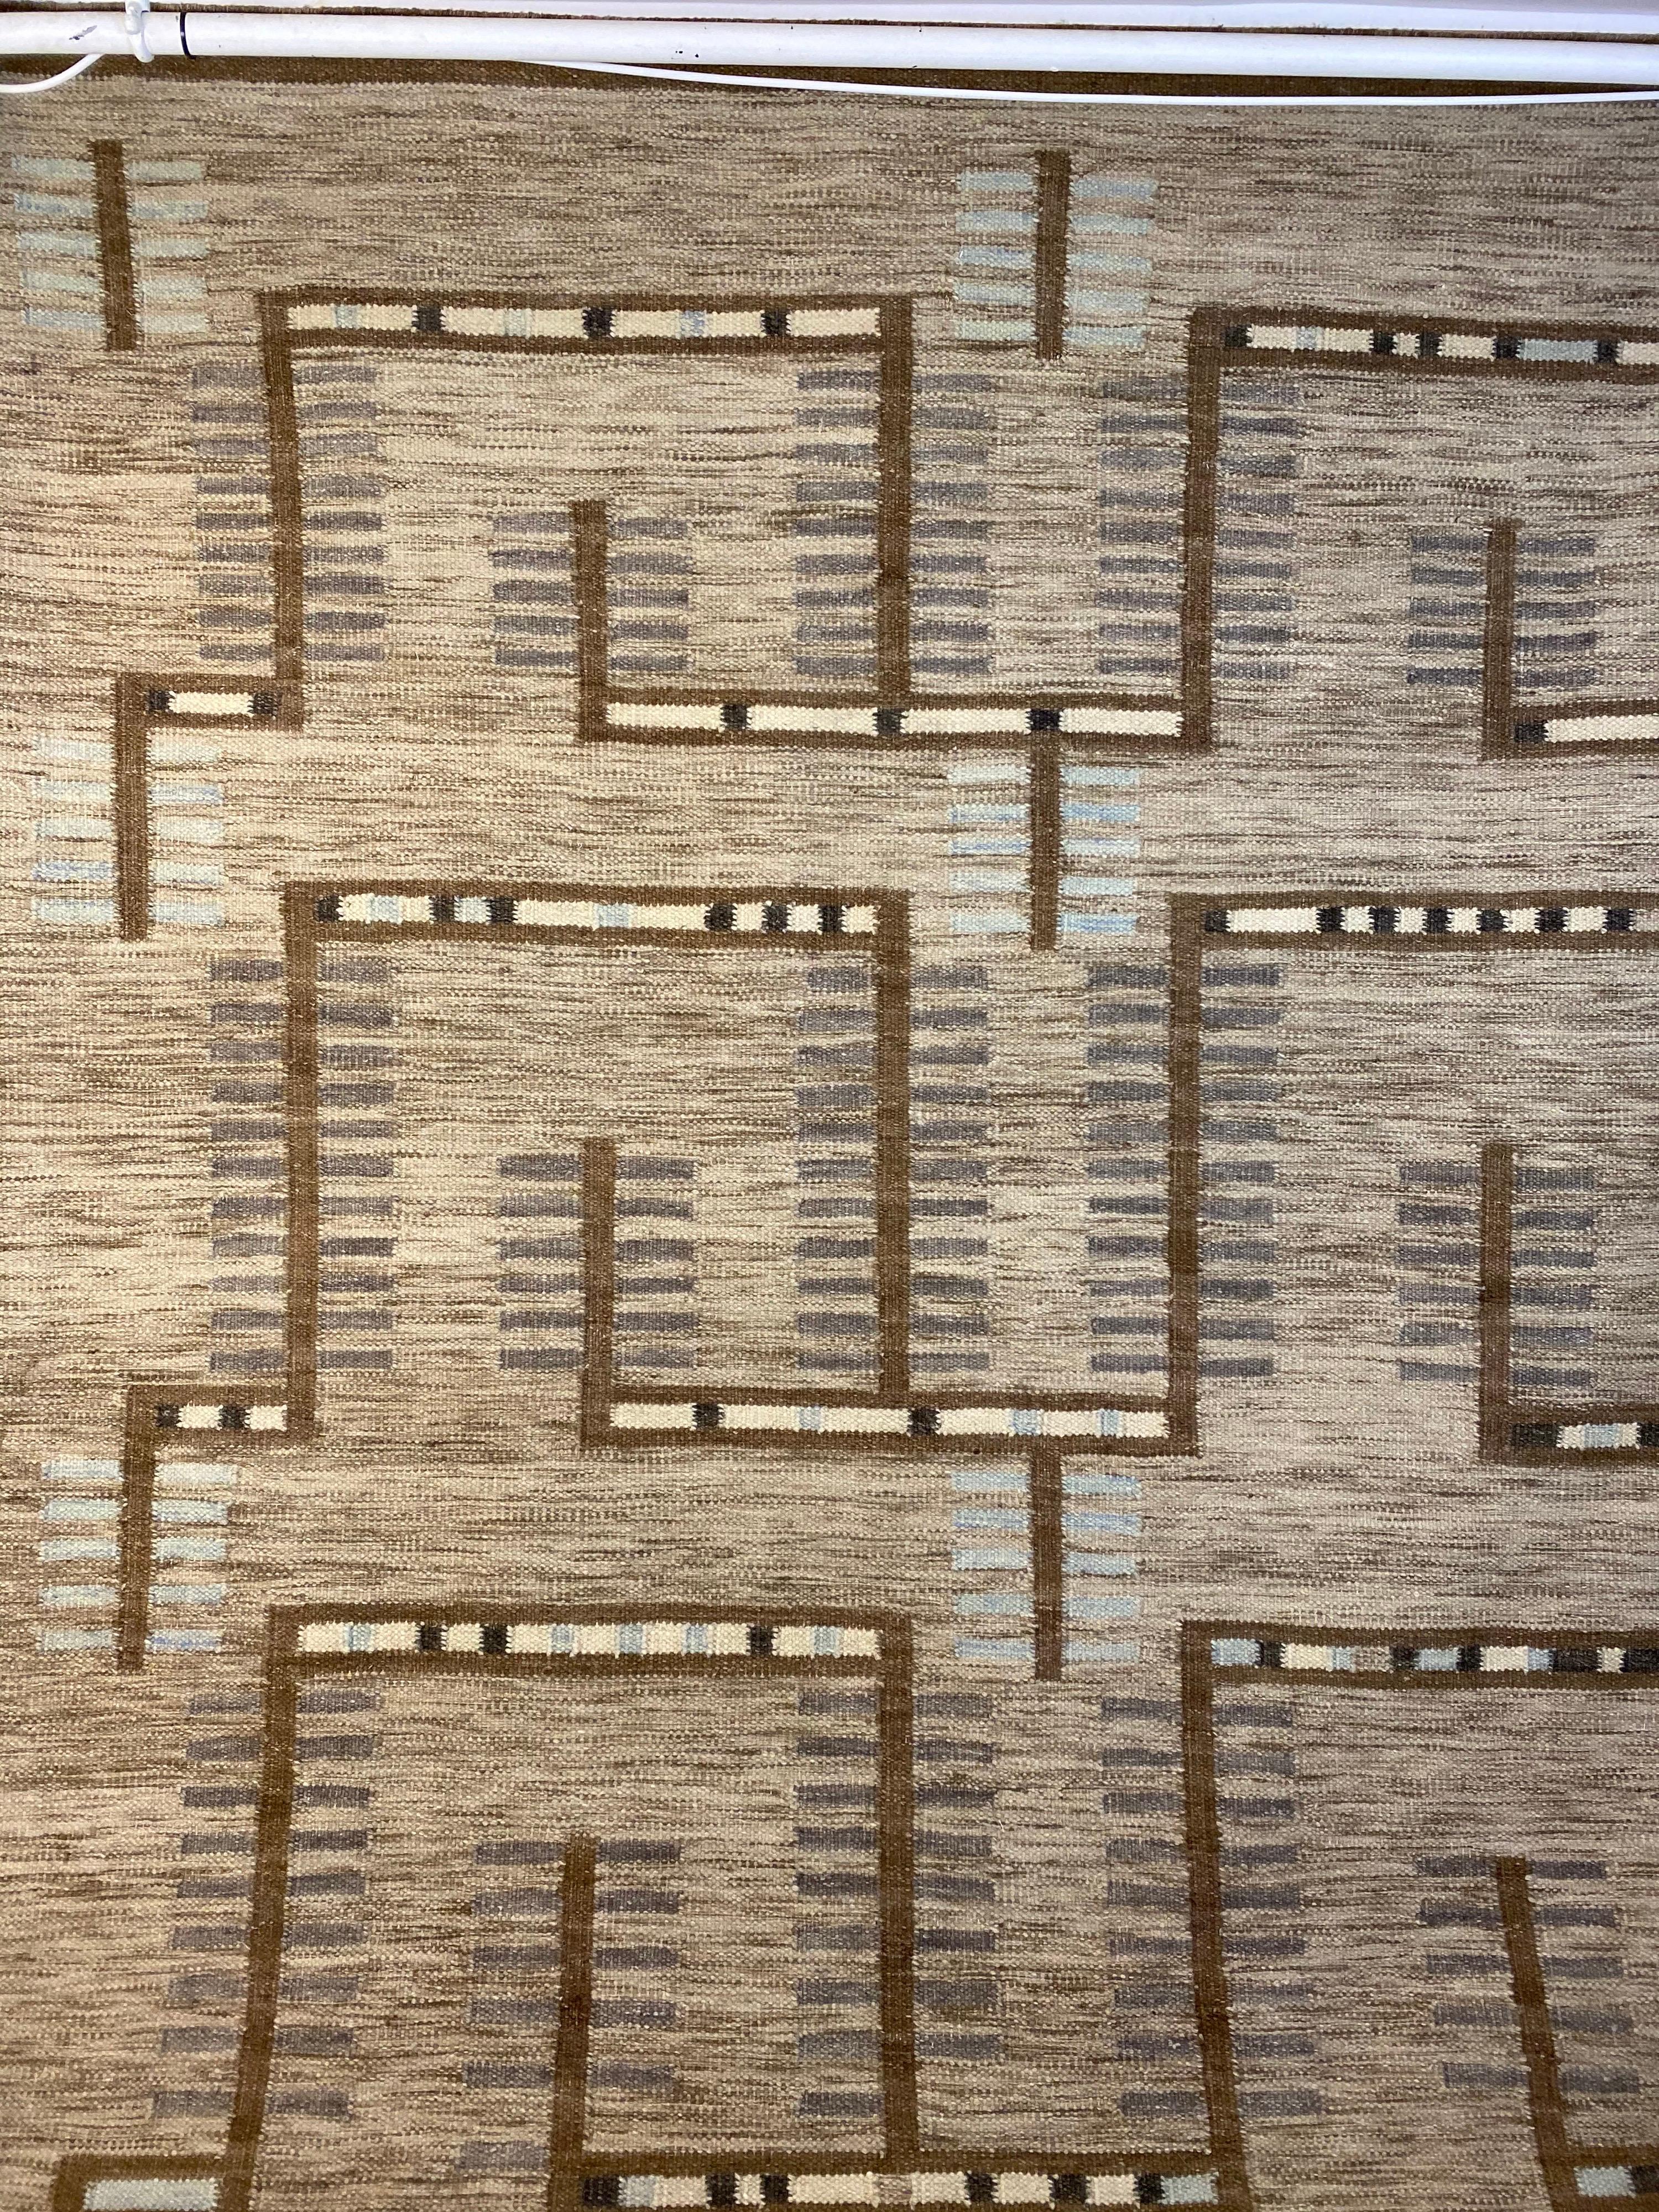 Swedish flat-weave wool carpet in amazing condition! Exceptionally clean showing no wear! Geometric design in shades of browns and tans. Great large size, 78